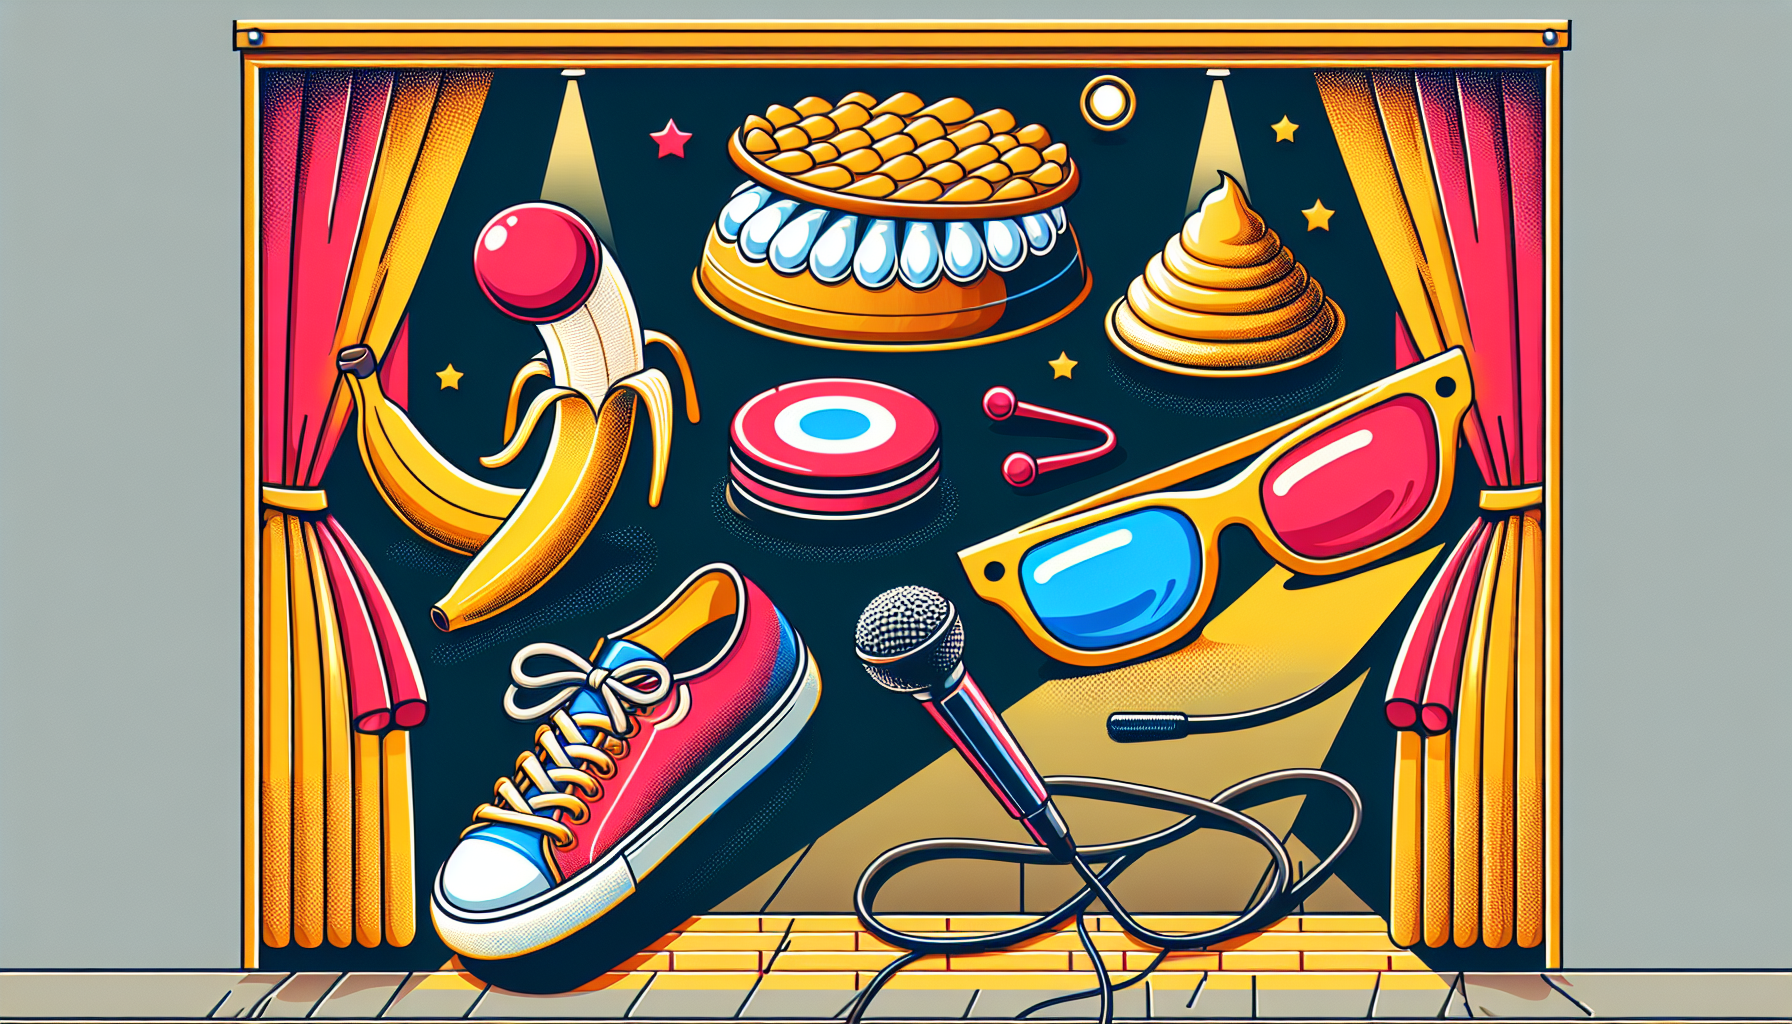 Create a modern, colorful representation of classic comedy tropes transformed. Illustrate a stage with a banana peel, a cream pie, and a whoopee cushion placed strategically. Also, depict a spotlit stand-up comic microphone. Replace the vintage floppy shoes with sleek modern sneakers and the traditional red clown nose with funky neon sunglasses. Ensure no text or words are present in the image.